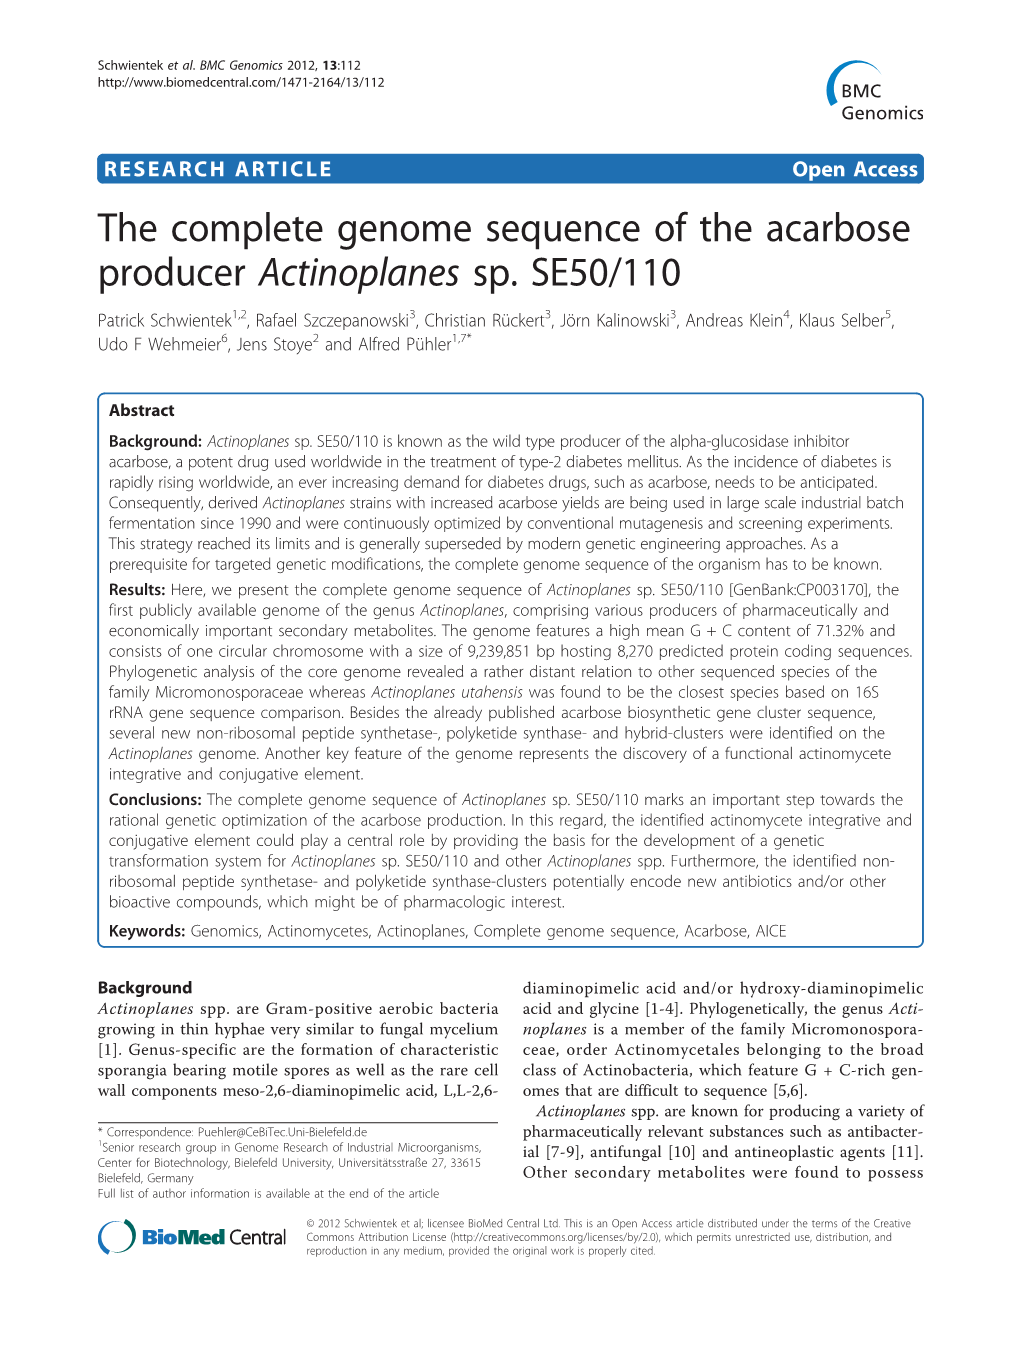 The Complete Genome Sequence of the Acarbose Producer Actinoplanes Sp